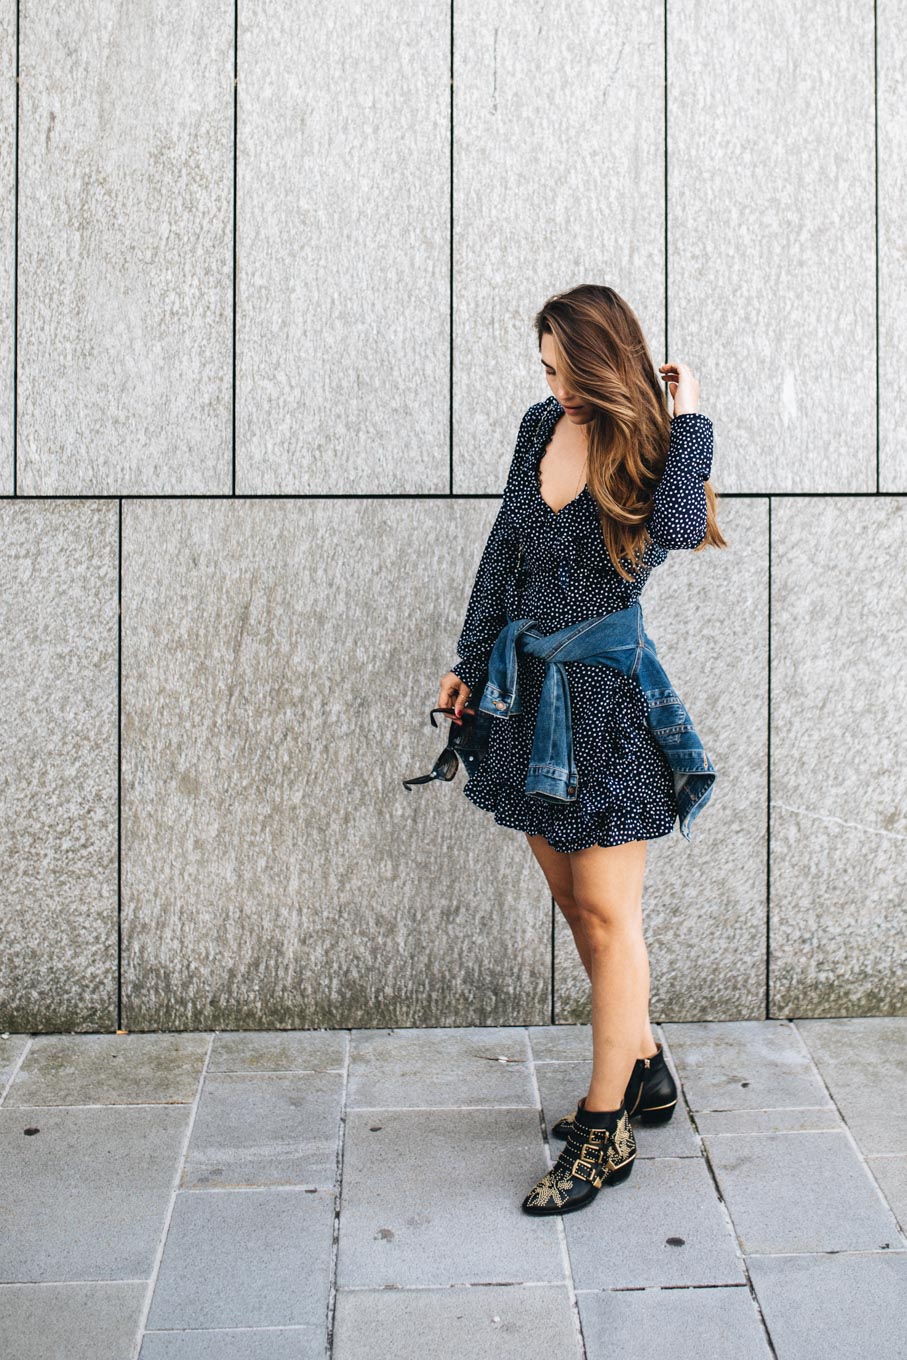 dress with denim jacket and boots